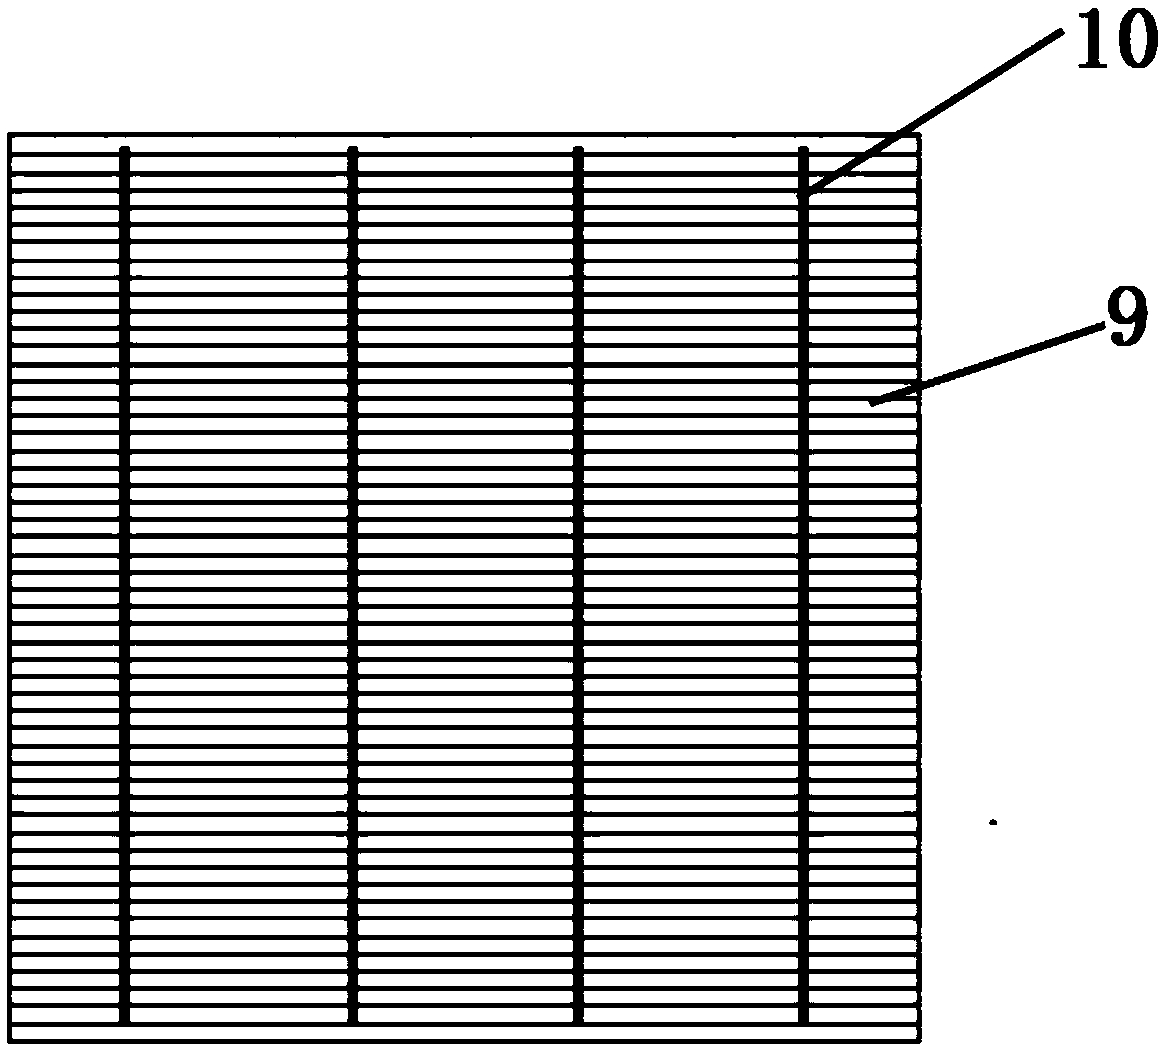 Mono-crystalline gallium-doped back passivation solar cell and preparation method thereof